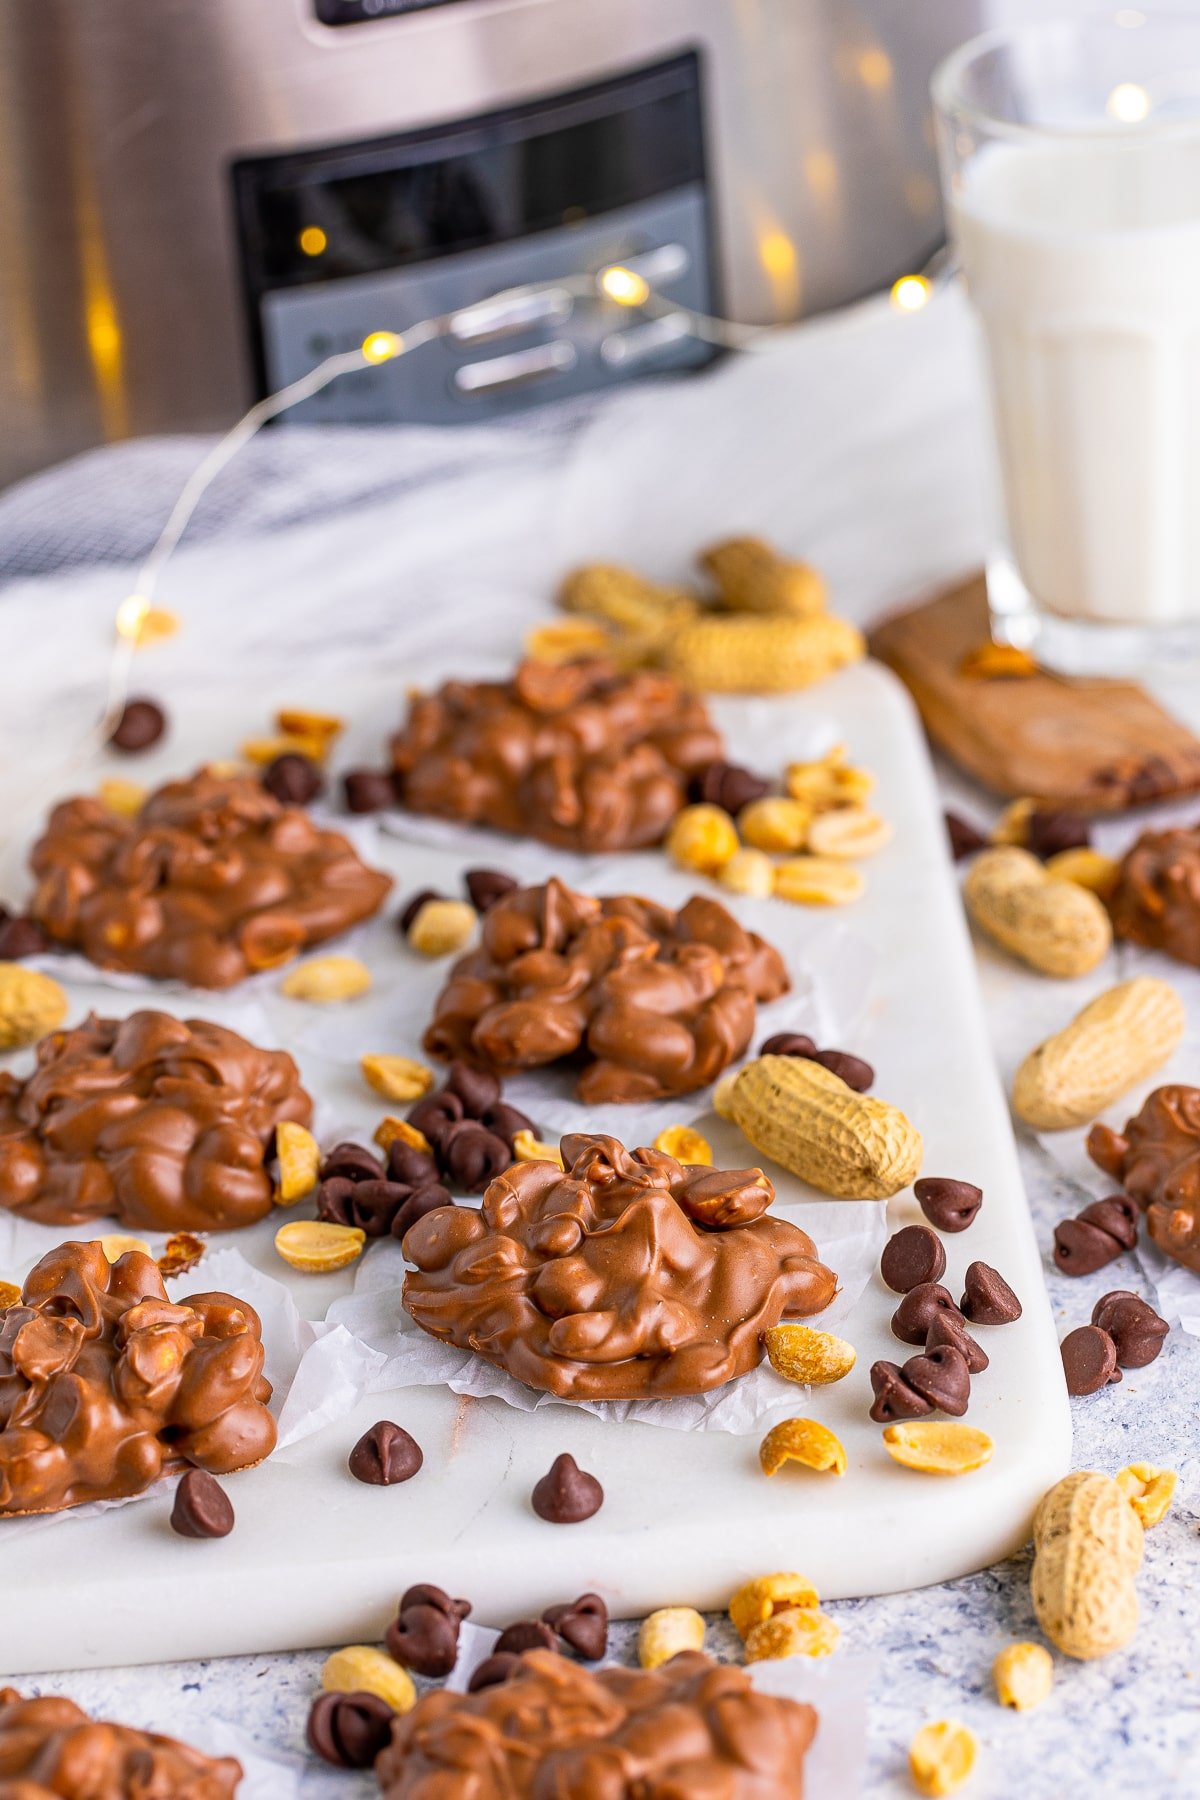 Slow Cooker Peanut Clusters on board with peanuts and chocolate chips surrounding them.